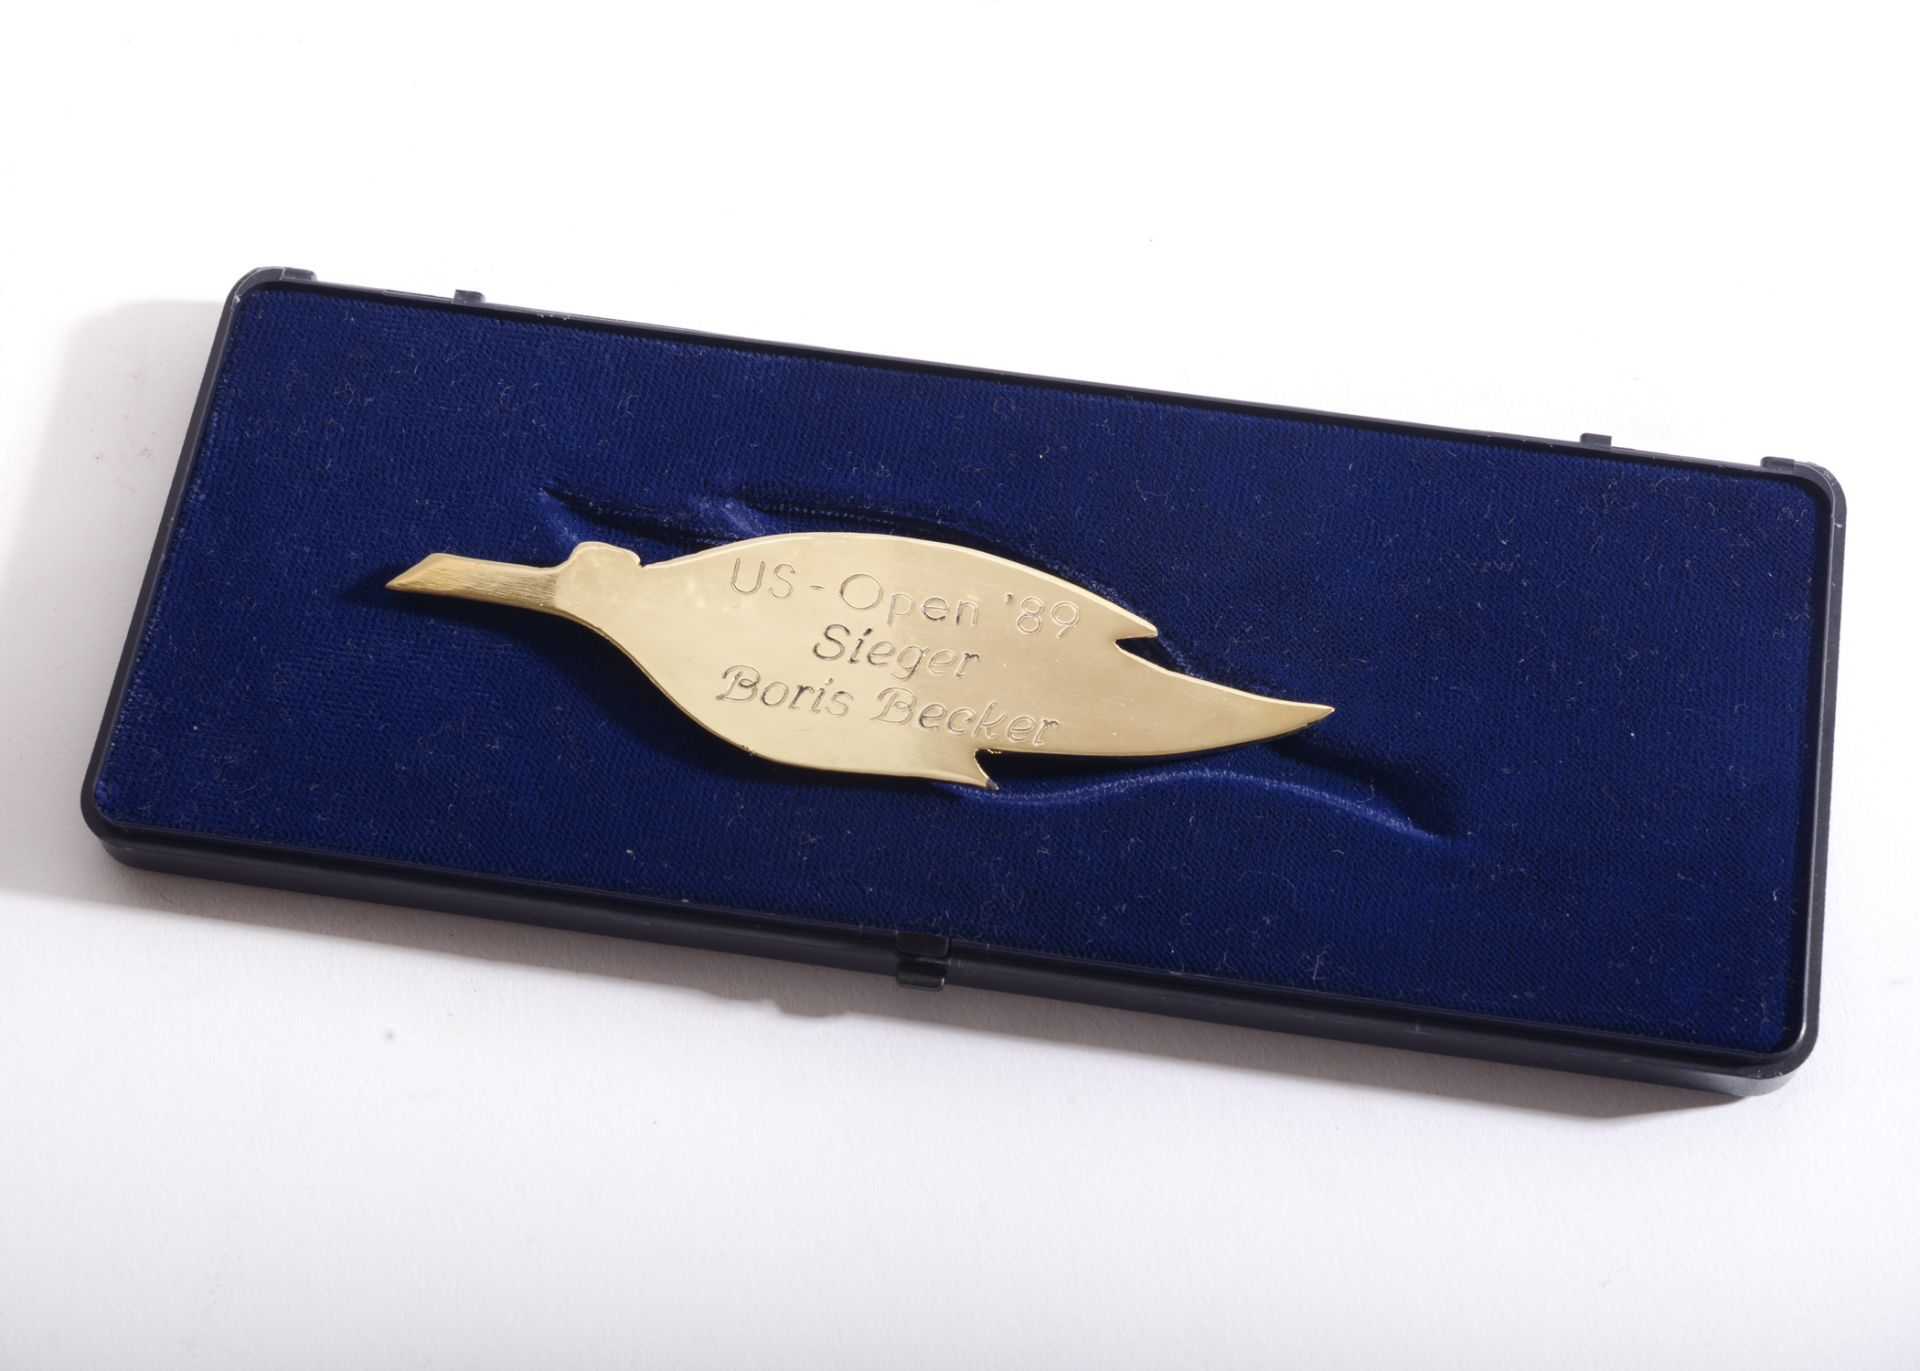 A Gold Coloured Cast Metal Leaf bearing the inscription US Open ’89 Sieger Boris Becker on the - Image 2 of 2